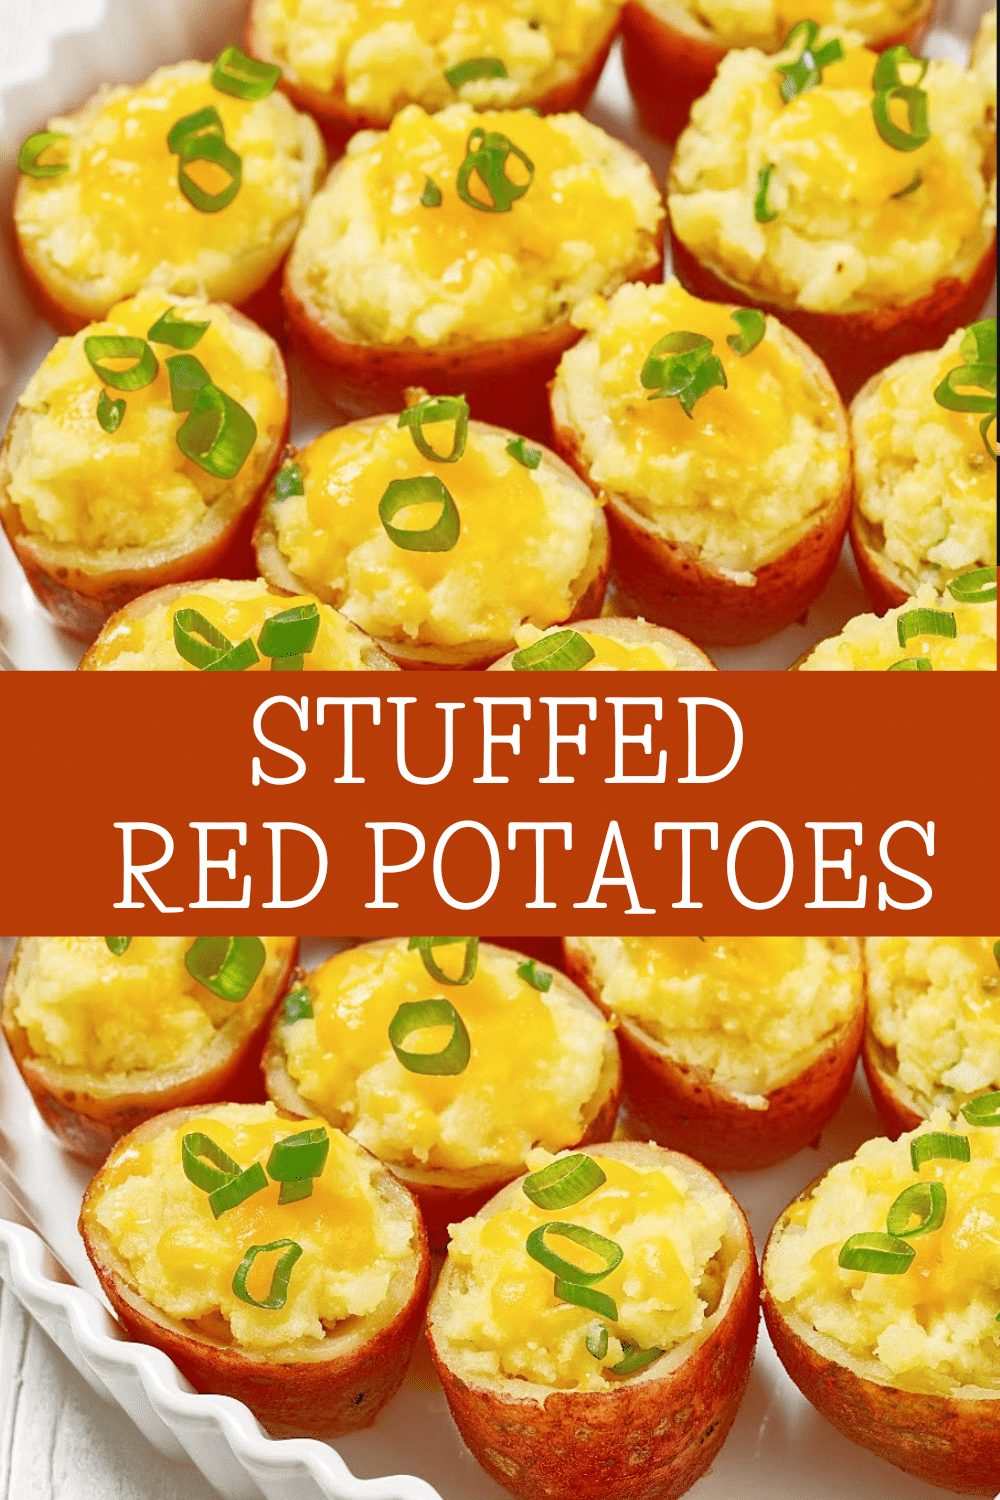 Stuffed Baby Red Potatoes ~Serve these savory potato bites as an appetizer or fun side dish, perfect for any occasion! via @thiswifecooks